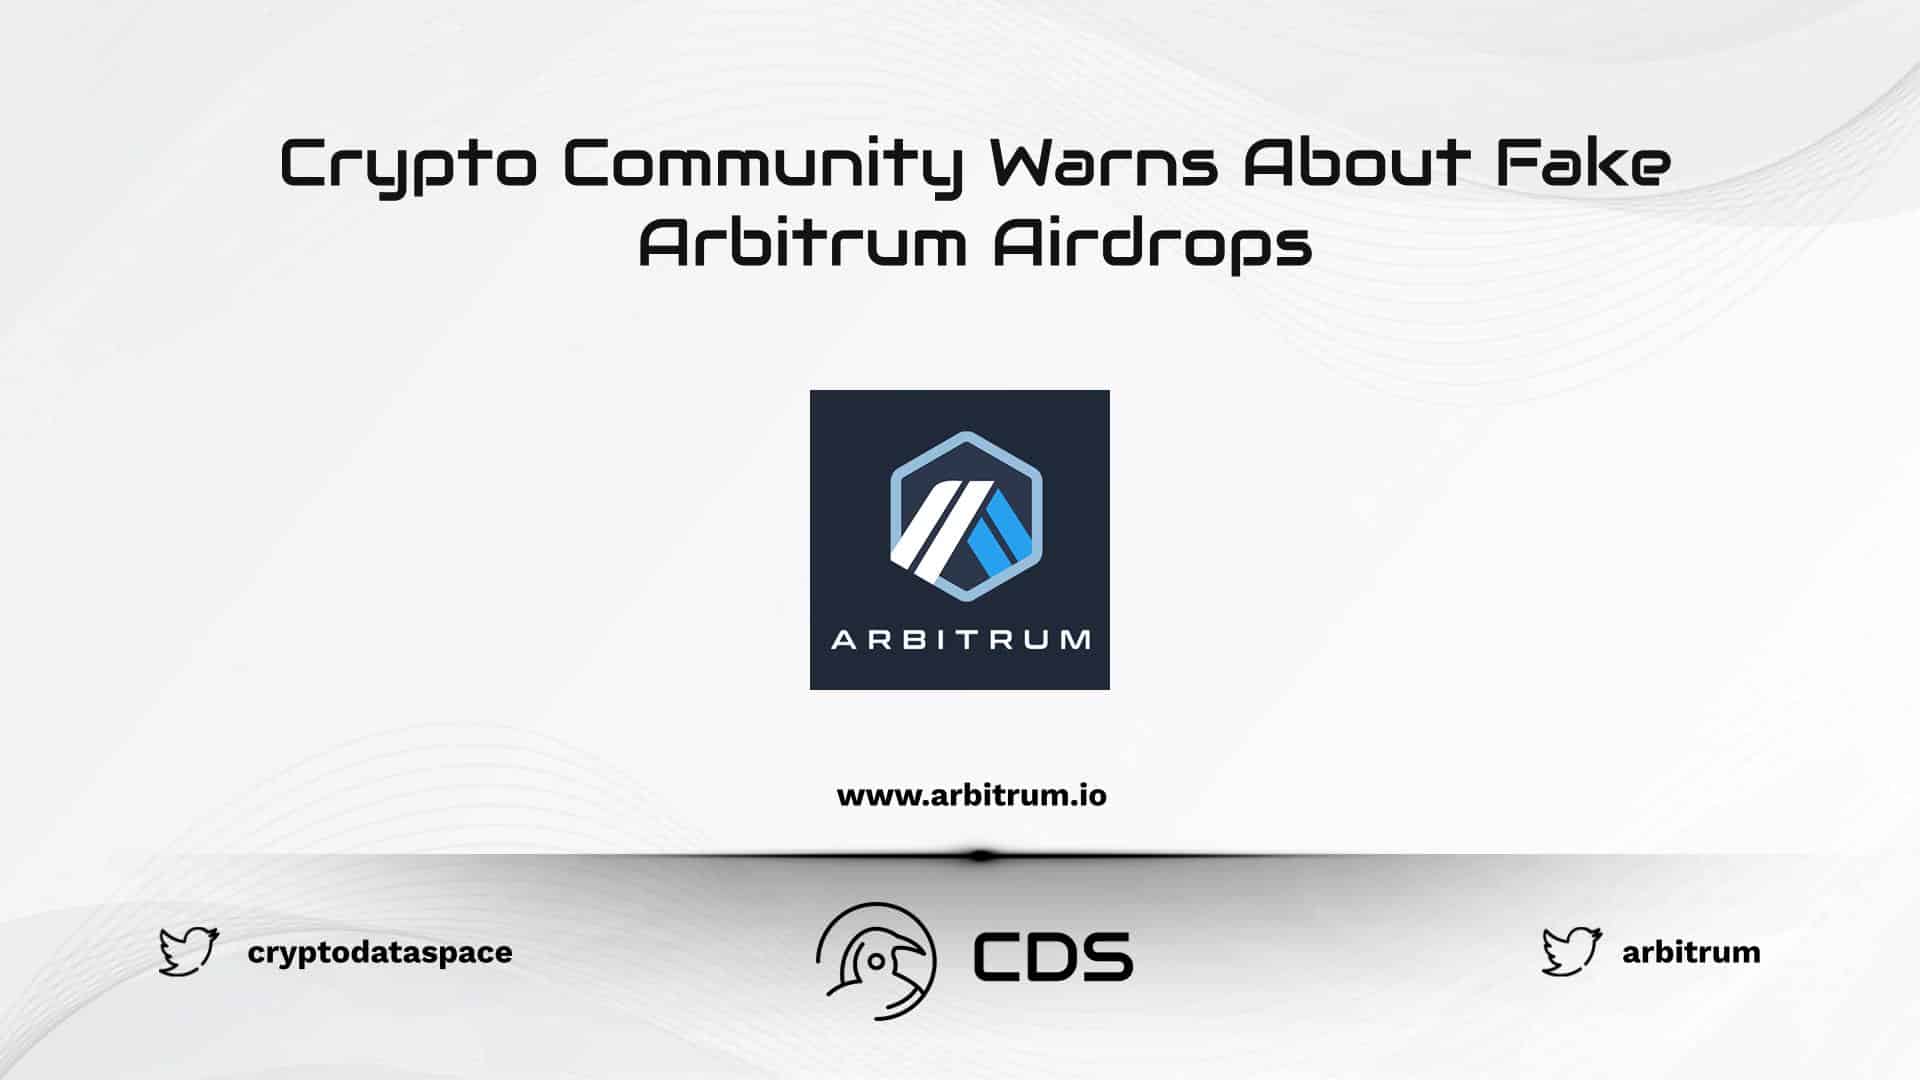 Crypto Community Warns About Fake Arbitrum Airdrops